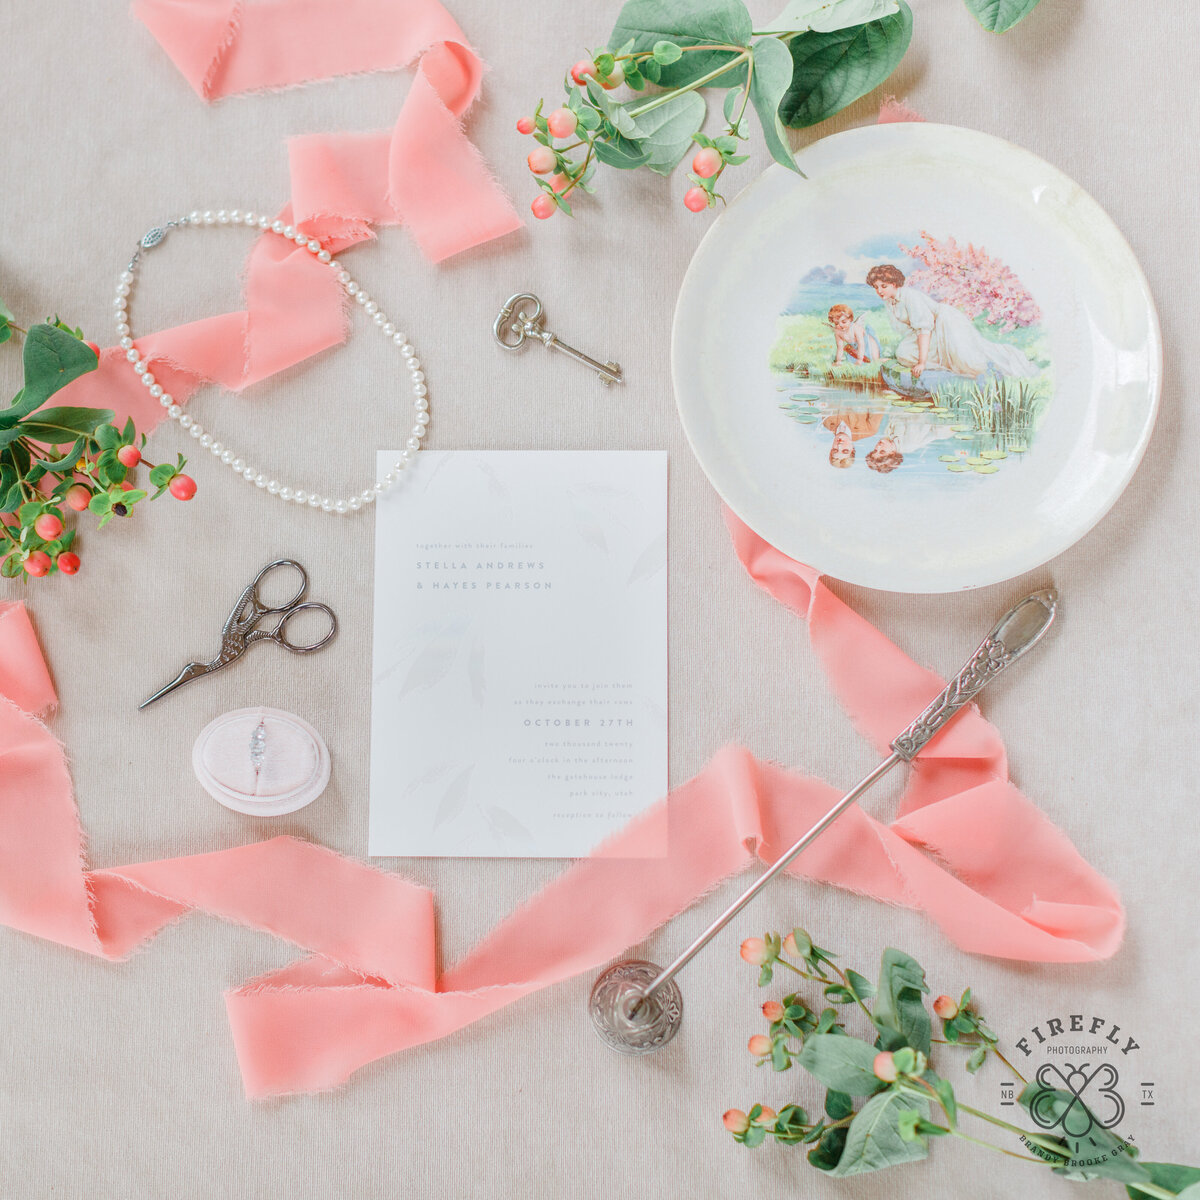 wedding invitation detail with antique plate scissors and pearls by Firefly Photography